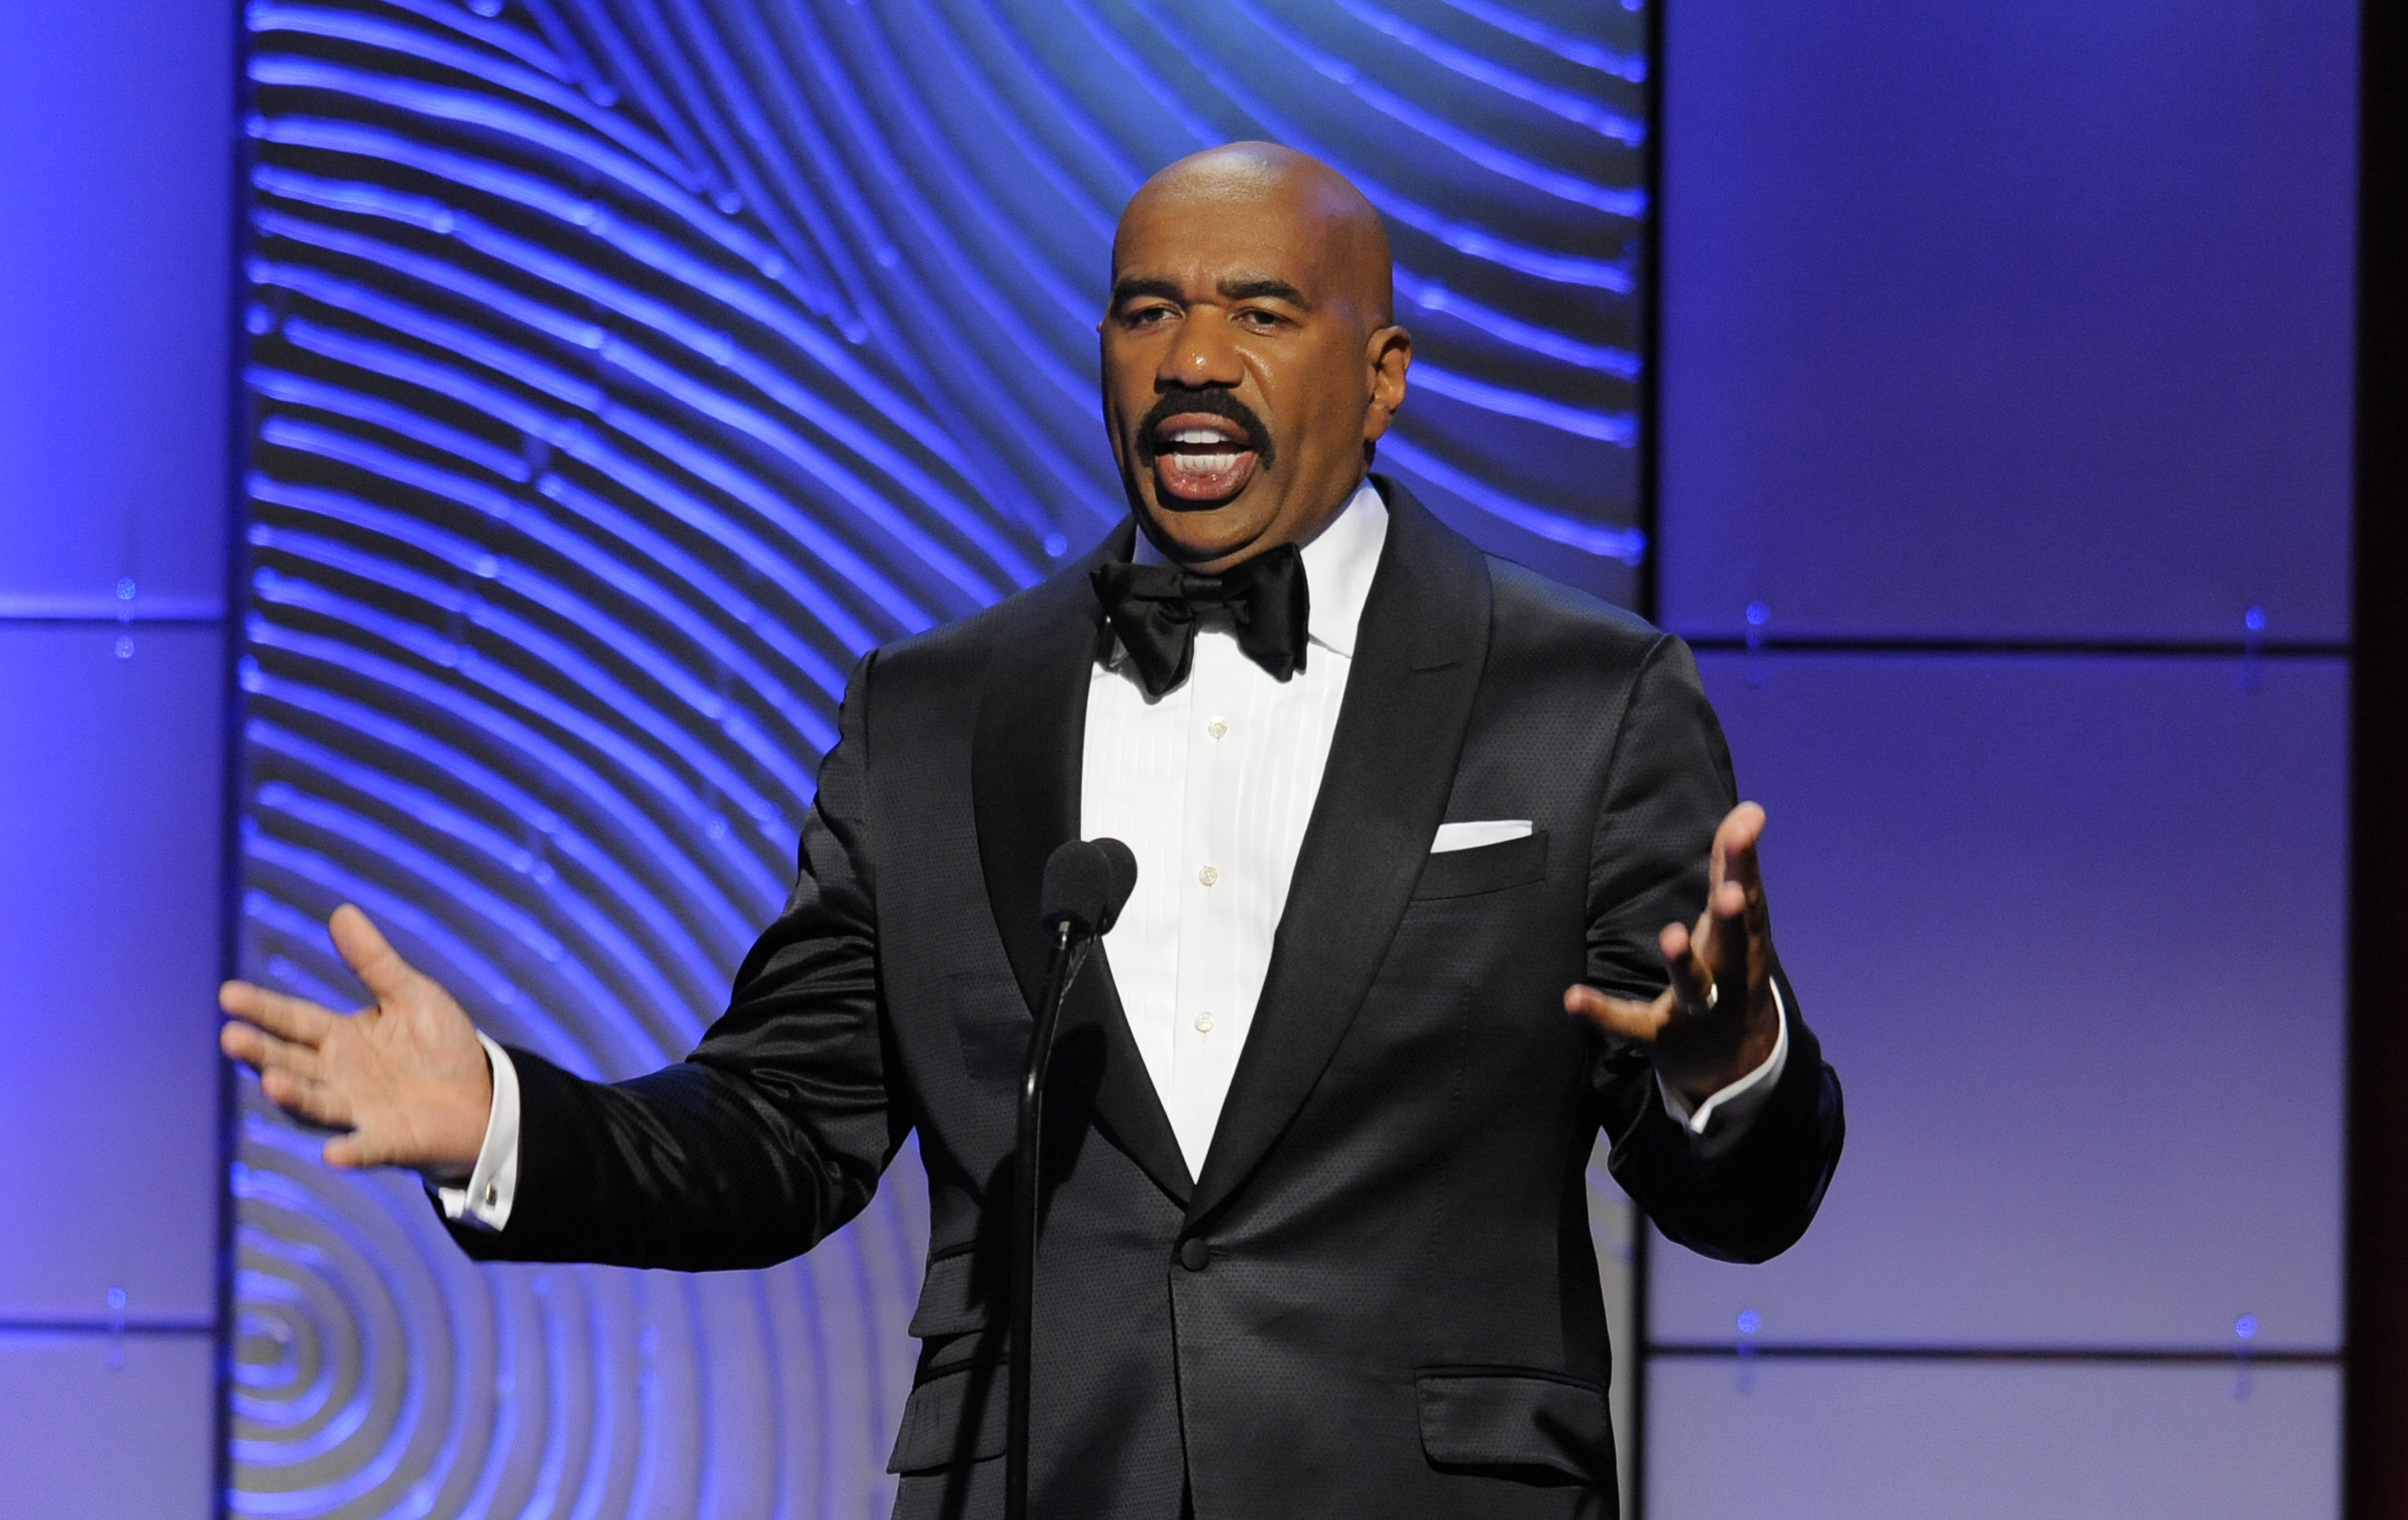 FILE - In this June 16, 2013 file photo, Steve Harvey speaks on stage at the 40th Annual Daytime Emmy Awards in Beverly Hills, Calif. NBC's new series, "Little Big Shots," led the network to a ratings victory during its first week on the air, the Nielsen company said, Tuesday, March 15, 2016. The comic Harvey is the host as talented youngsters _ a 6-year-old spelling champ, a 4-year-old basketball phenom, a 6-year-old choir conductor, display their abilities.(Photo by Chris Pizzello/Invision/AP)